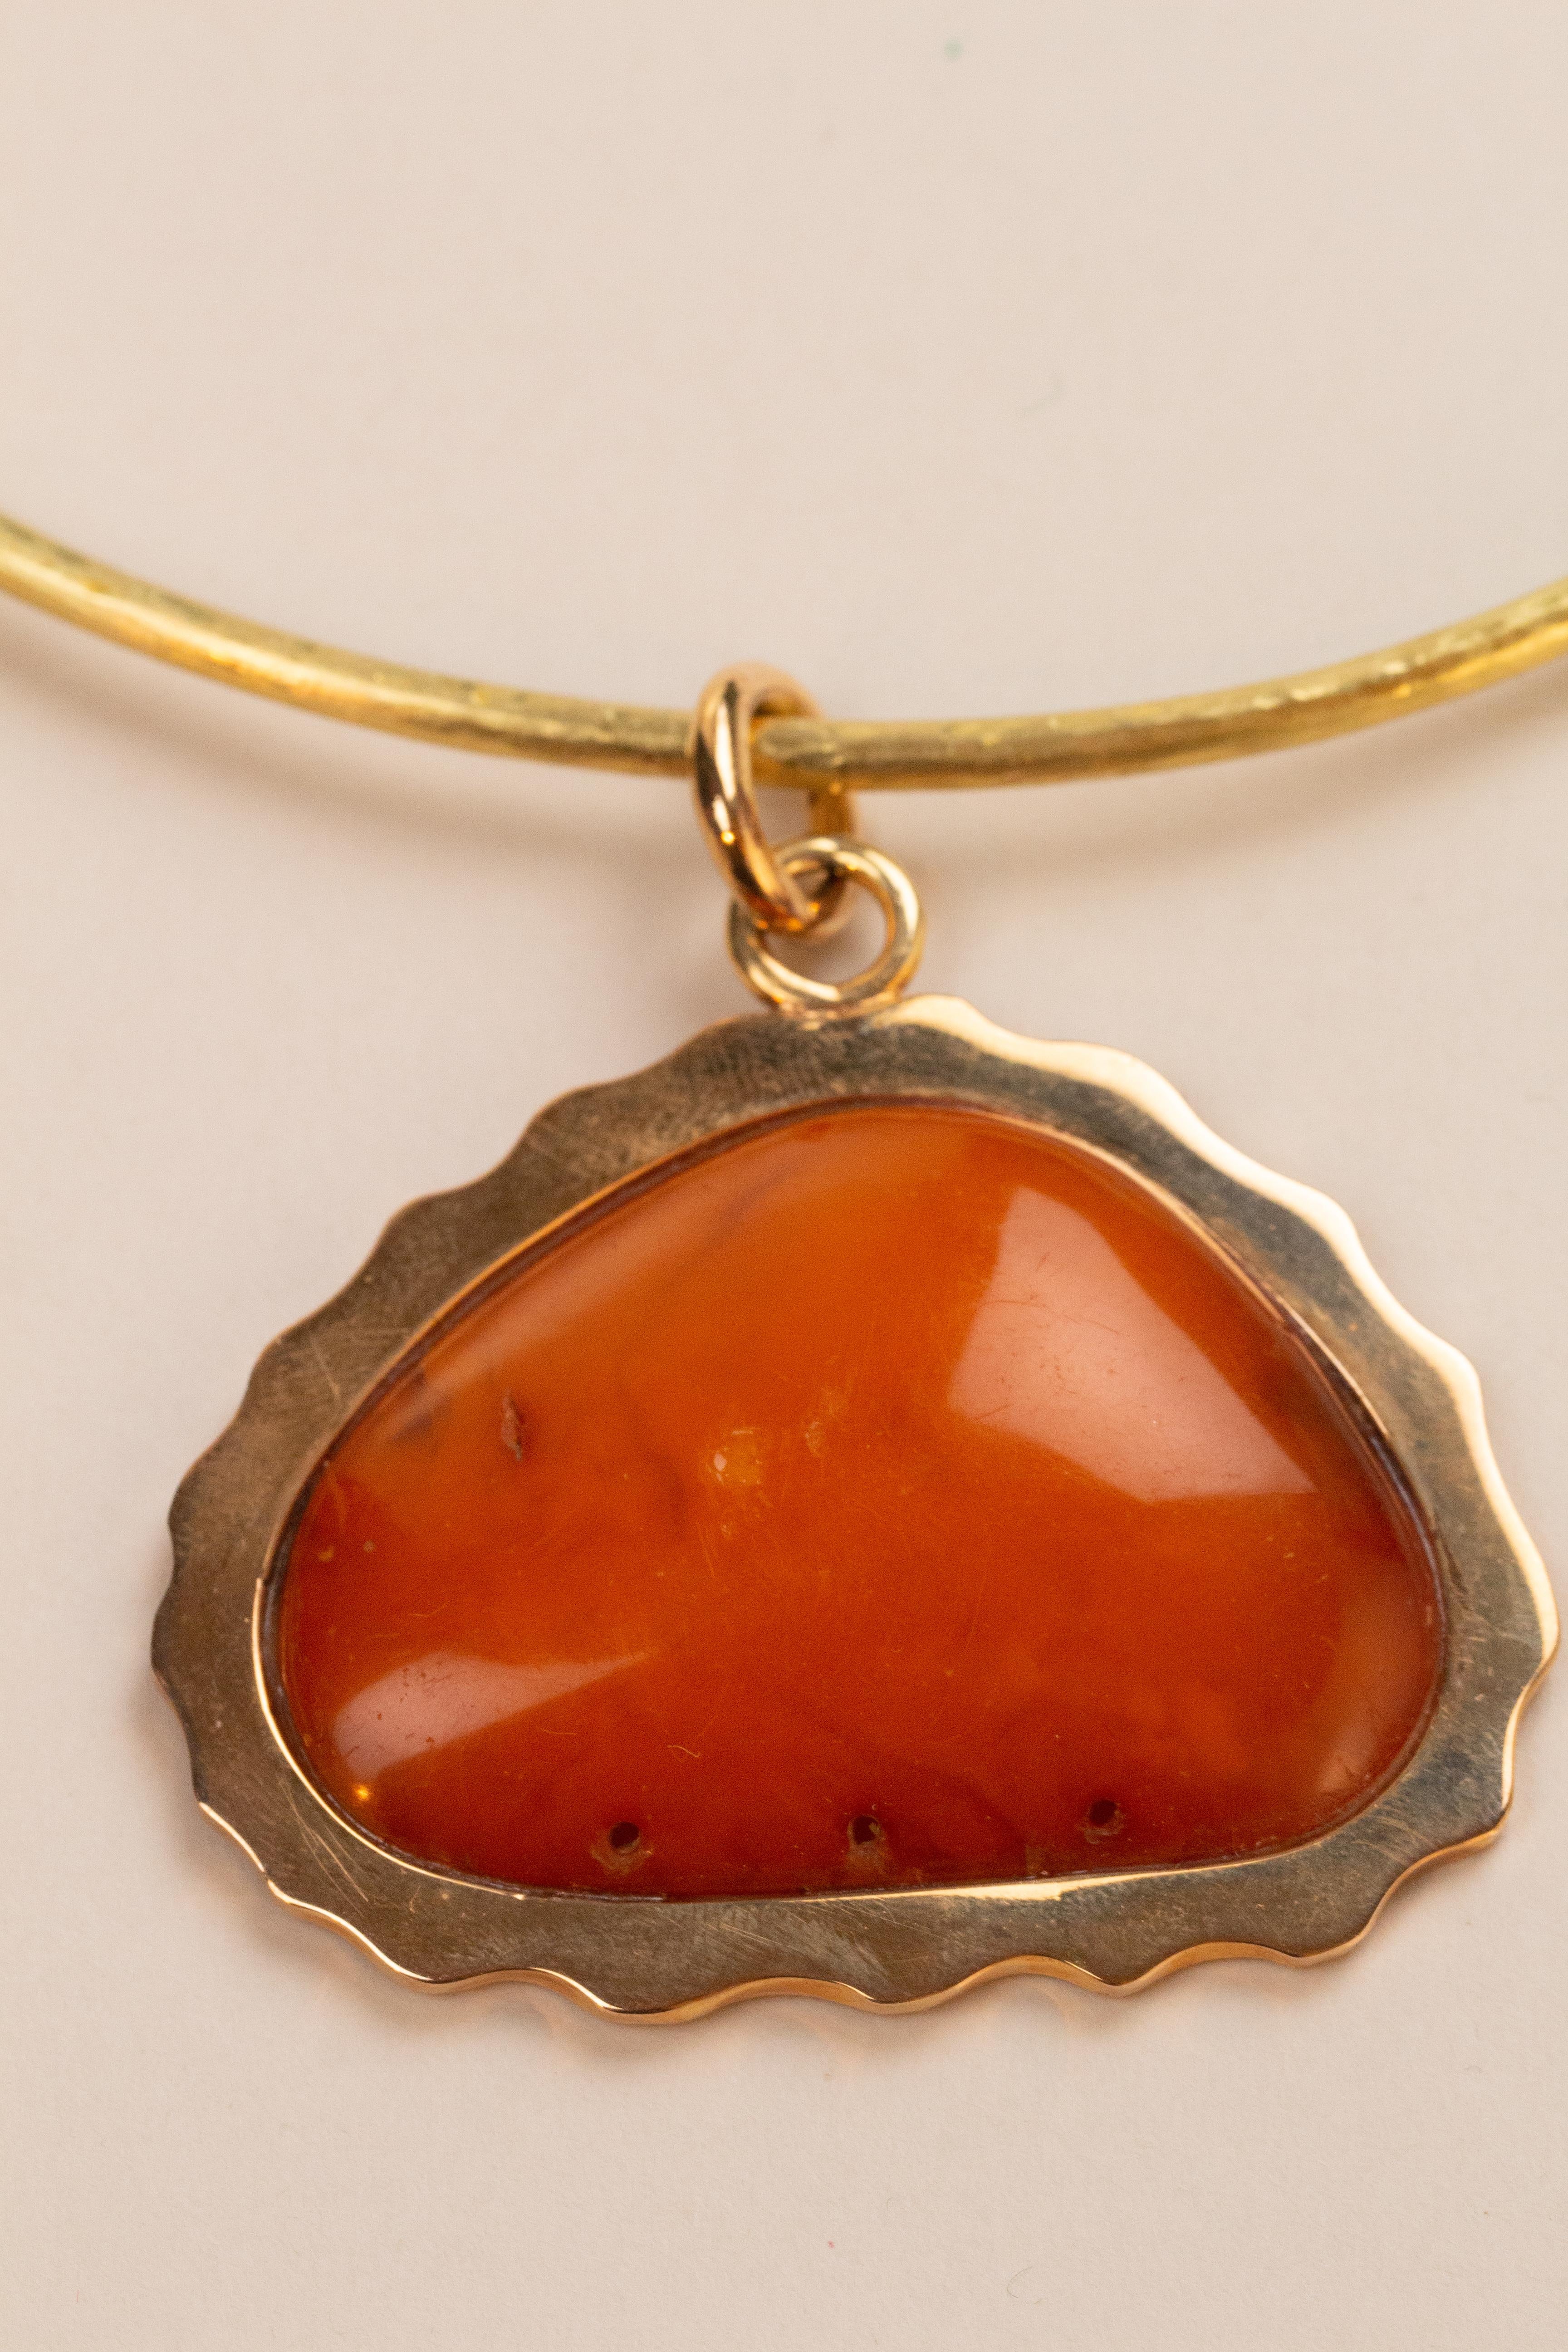 Special Bronze hand made necklace with antique pieces of baltic amber.
All Giulia Colussi jewelry is new and has never been previously owned or worn. Each item will arrive at your door beautifully gift wrapped in our boxes, put inside an elegant